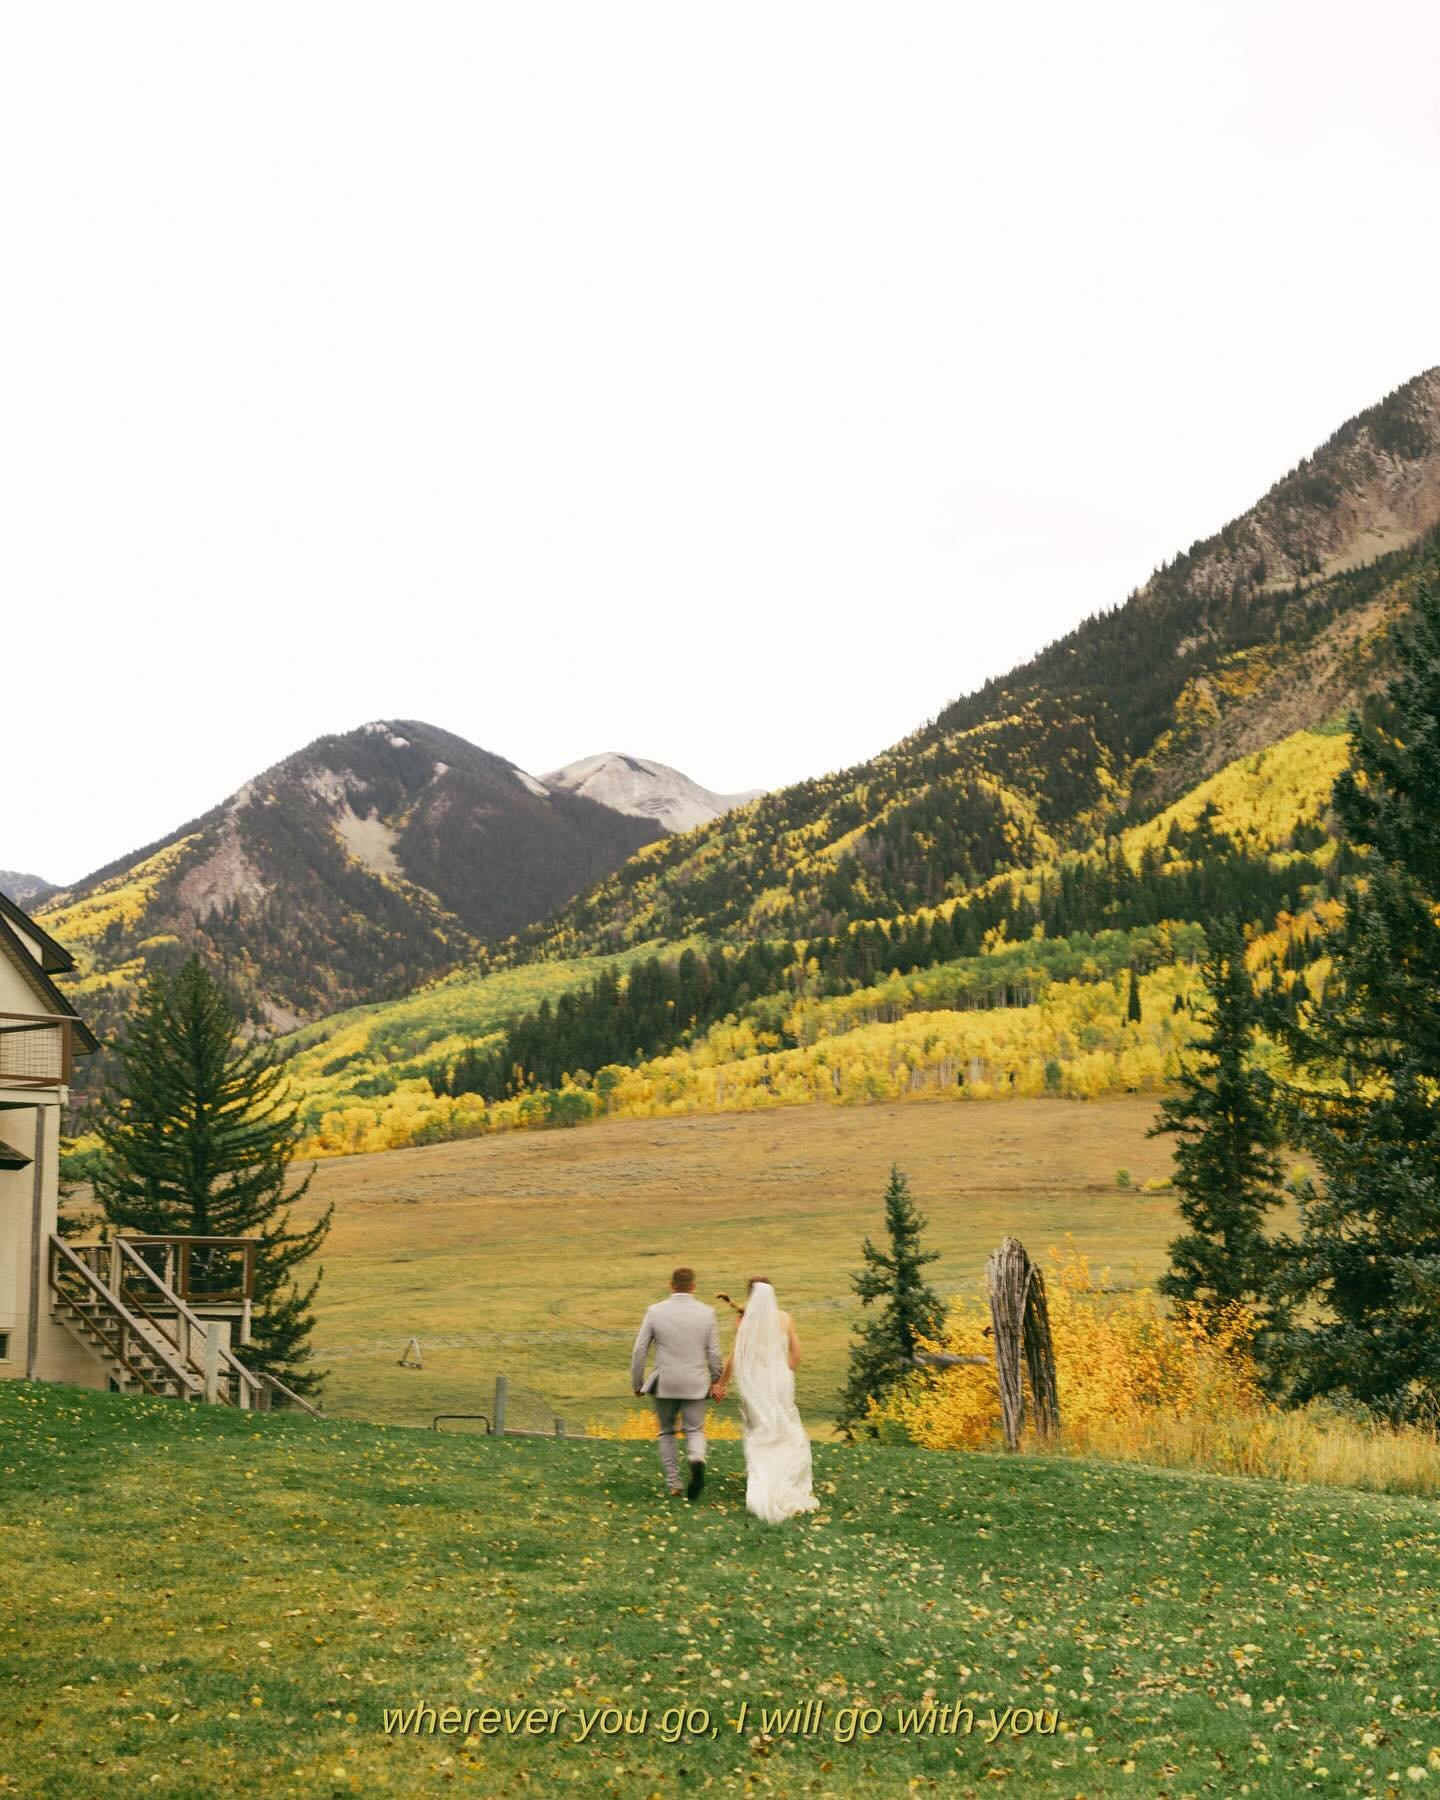 Simply the best 🦋

There&rsquo;s a place right here on Earth, where the morning sun kisses the mountain tops as the day starts. The laughter of friends and family mixes with the soft whisper of aspen leaves, creating a soundtrack of joy.

Here, ever